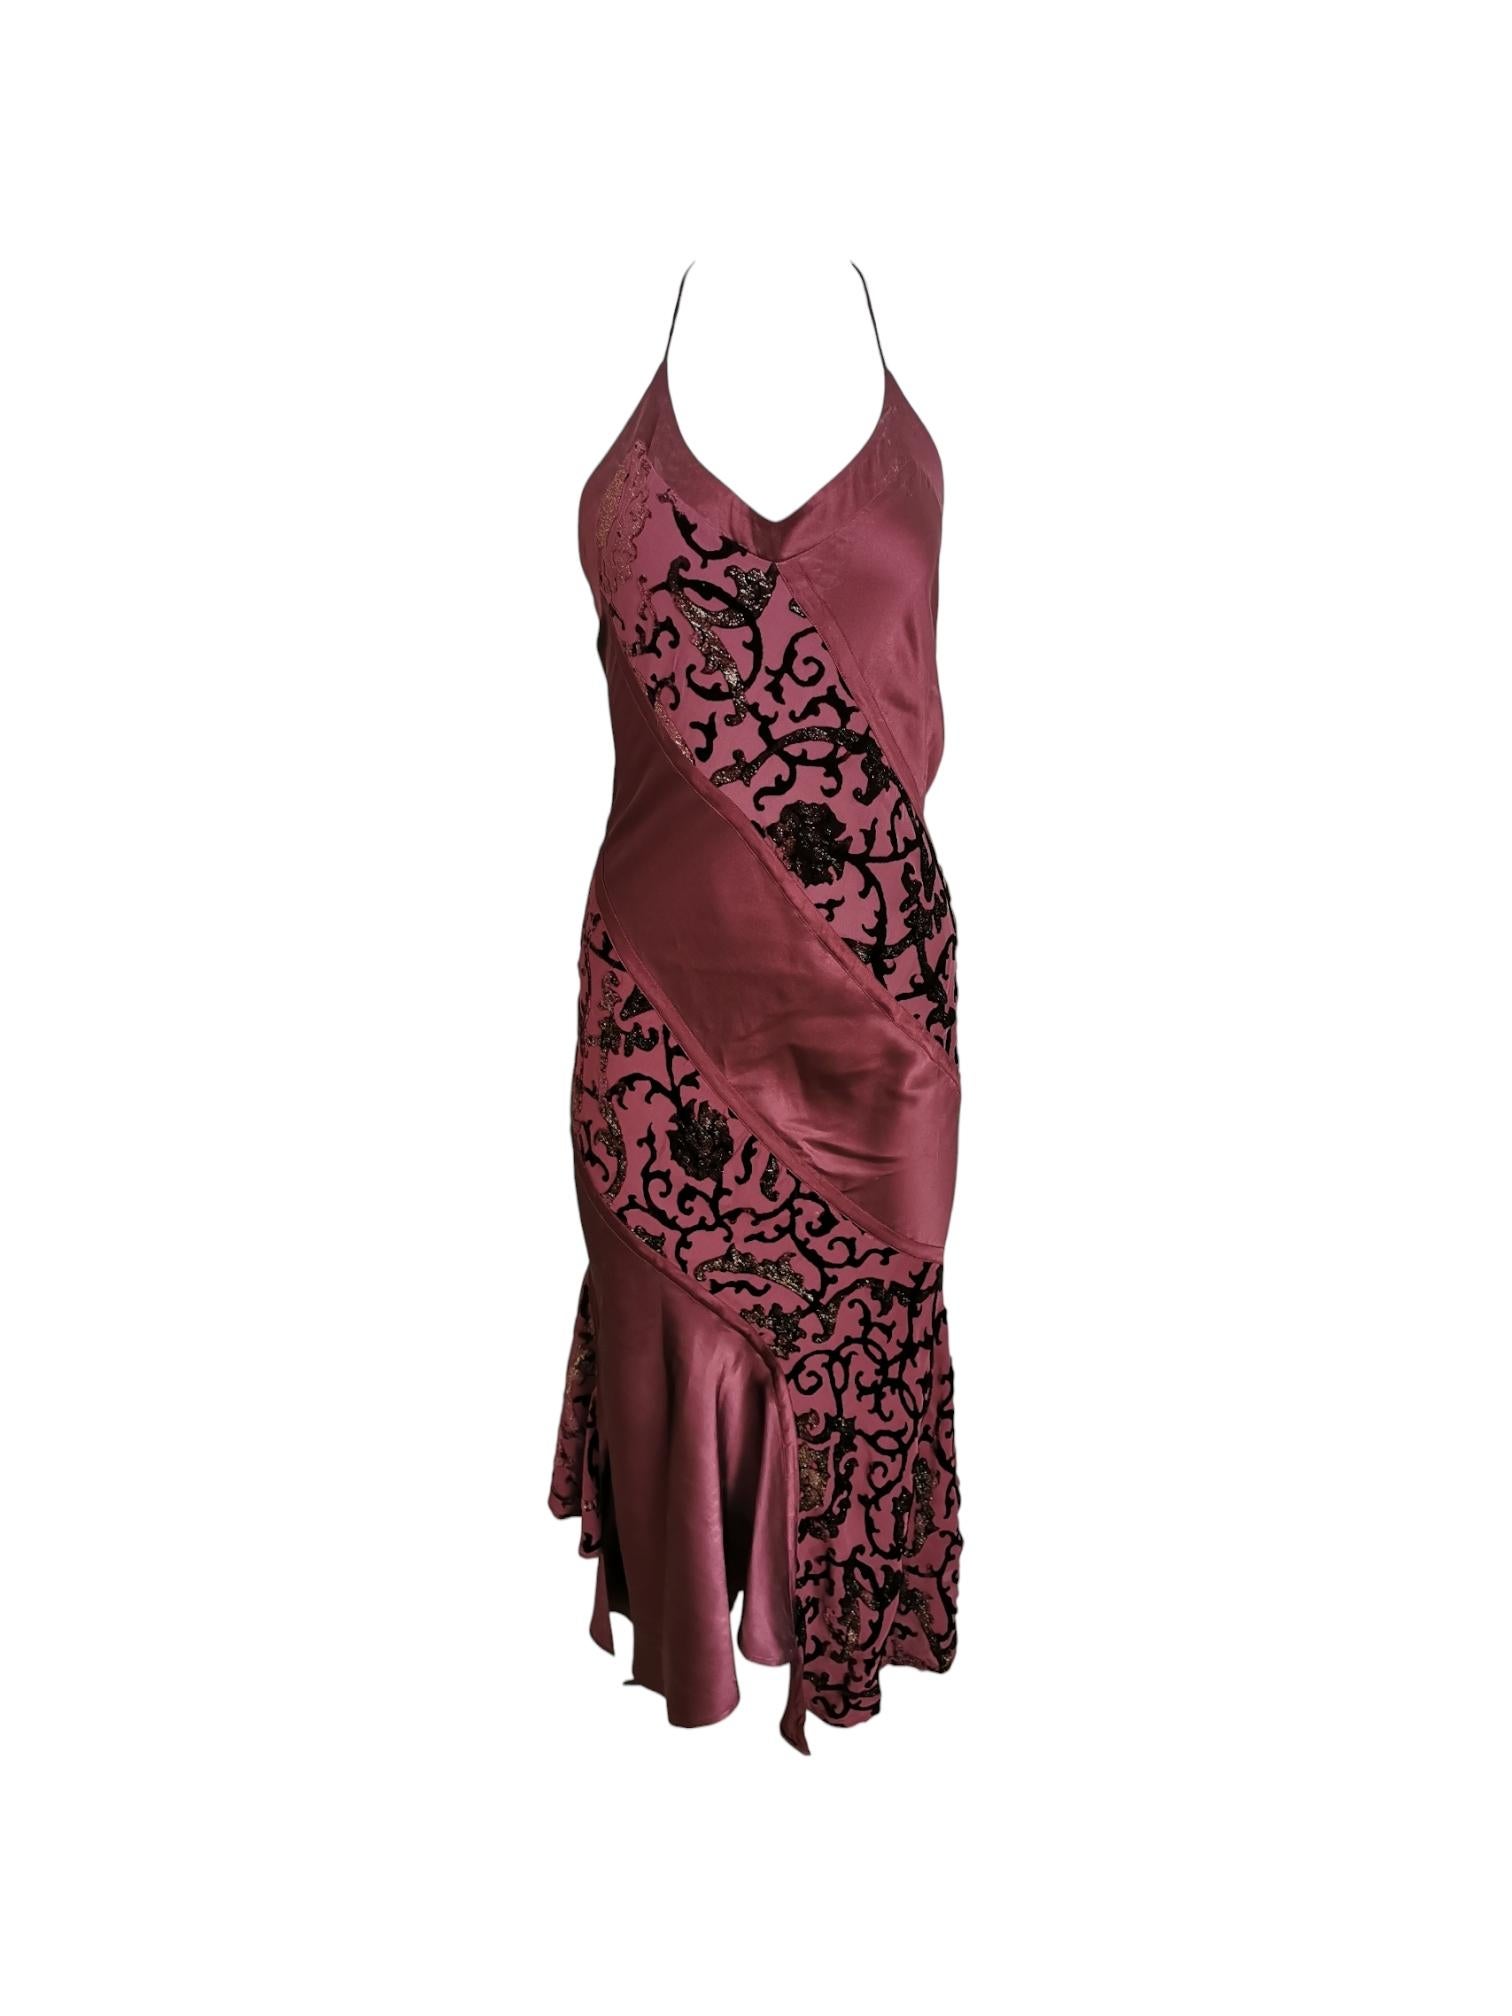 Roberto Cavalli burgundy slip dress with a decorative floral flocking print featuring thin straps, a slip dress style bodice, and a flared hem. 

Material: Silk and satin

Size: Small

Condition: Good however please note there is some white